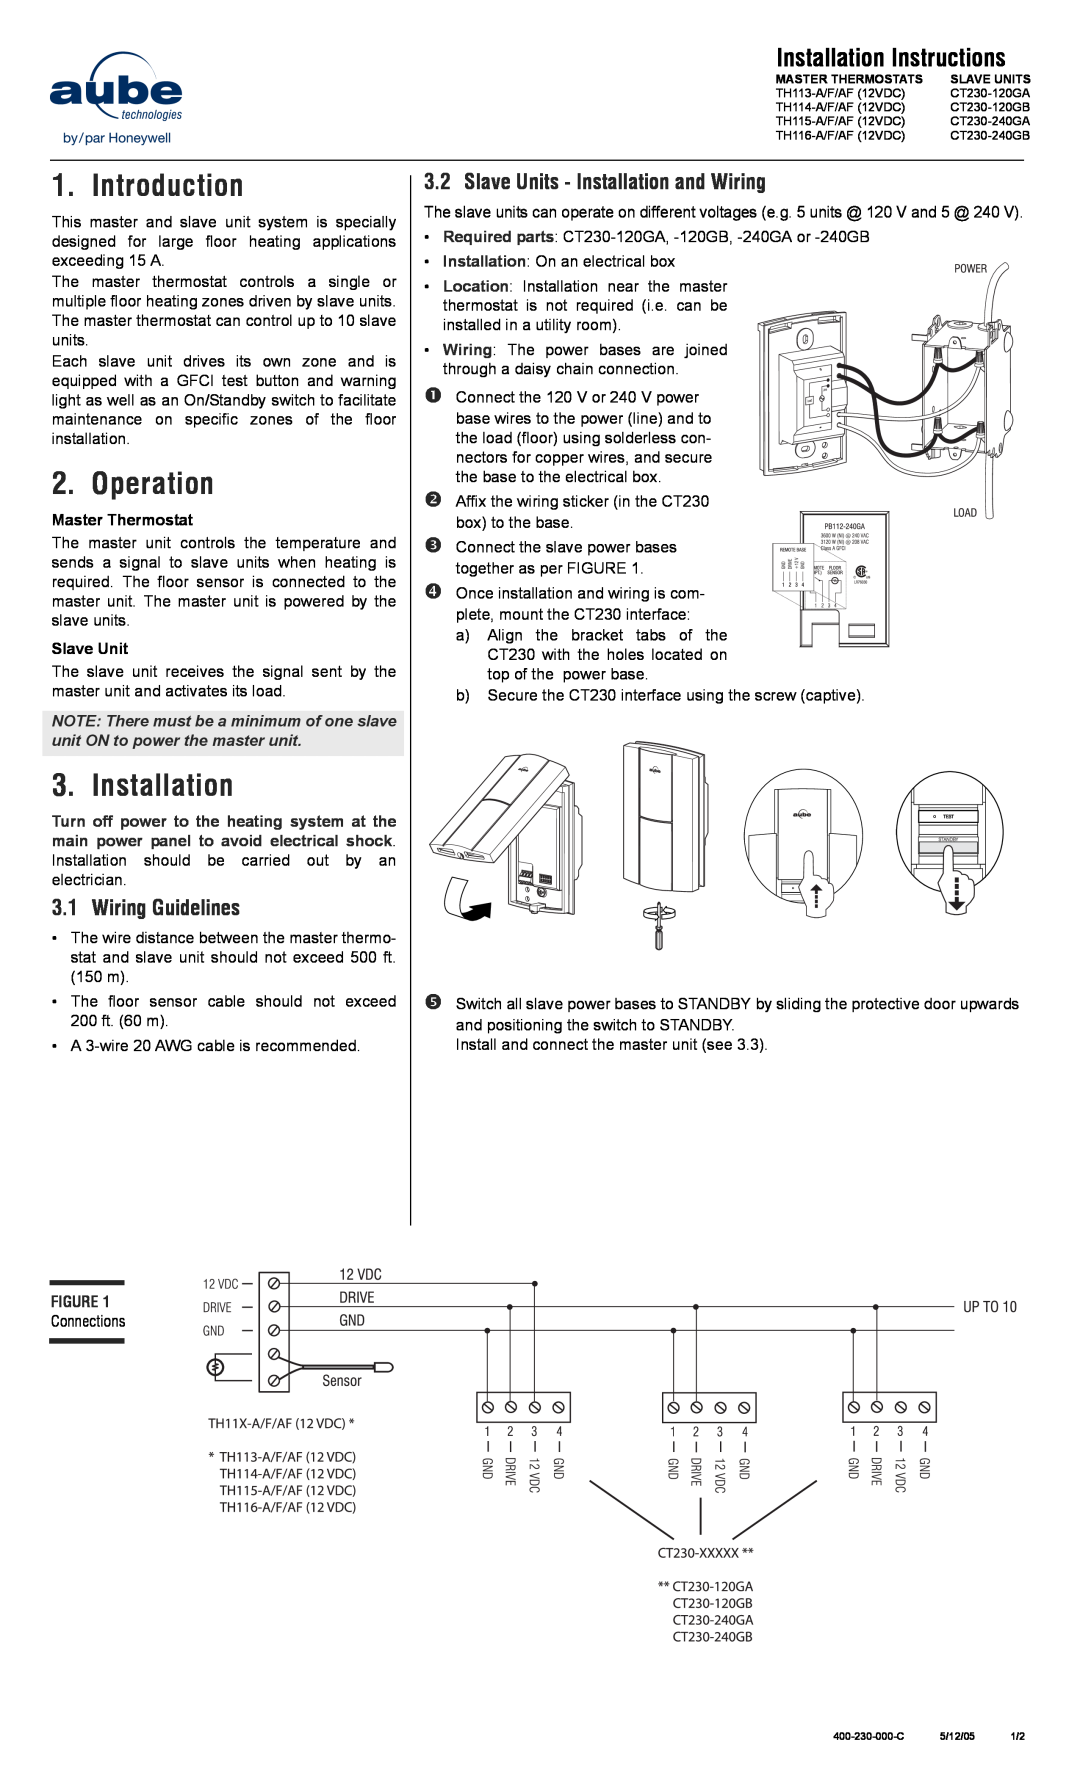 Aube Technologies TH113 F, TH116 F Introduction, Operation, Wiring Guidelines, Slave Units - Installation and Wiring 